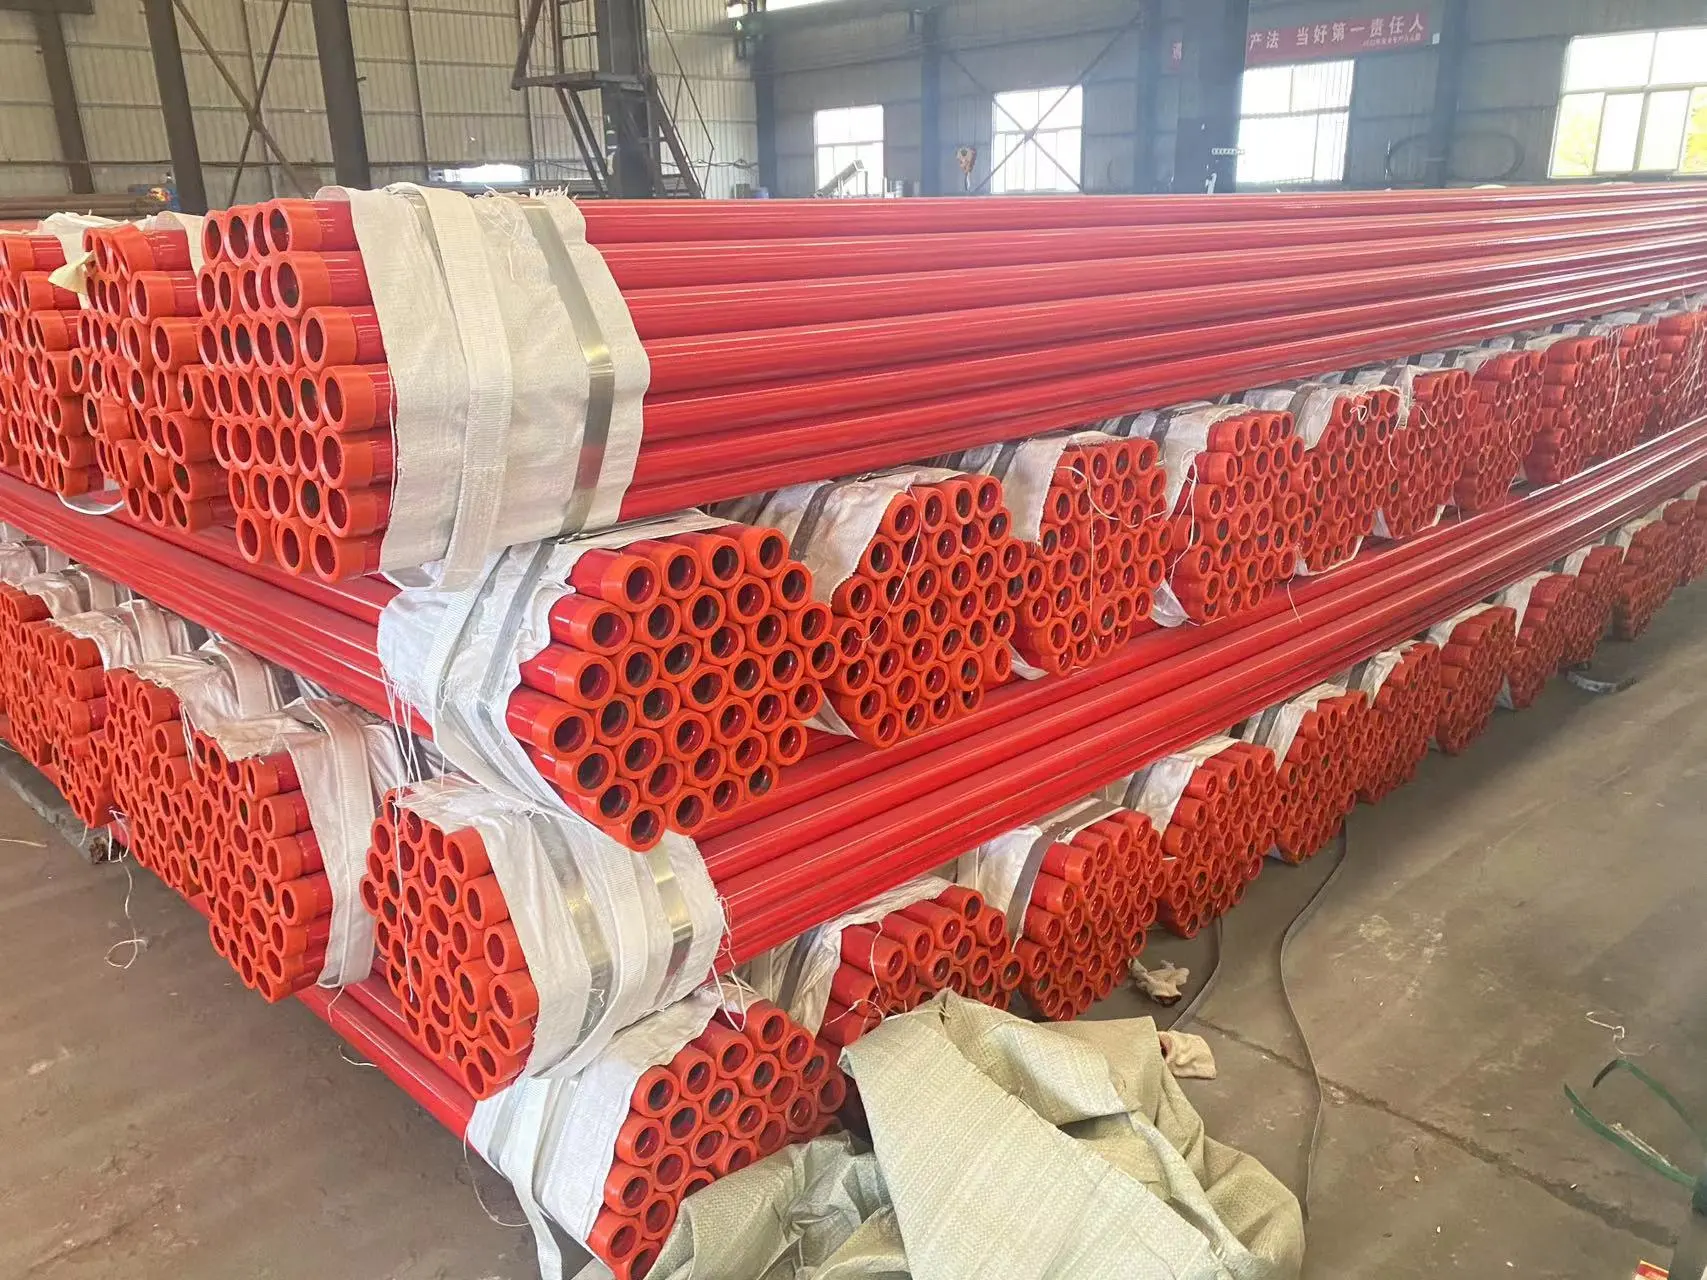 ASTM A795 ERW firefighting pipes， FM listed